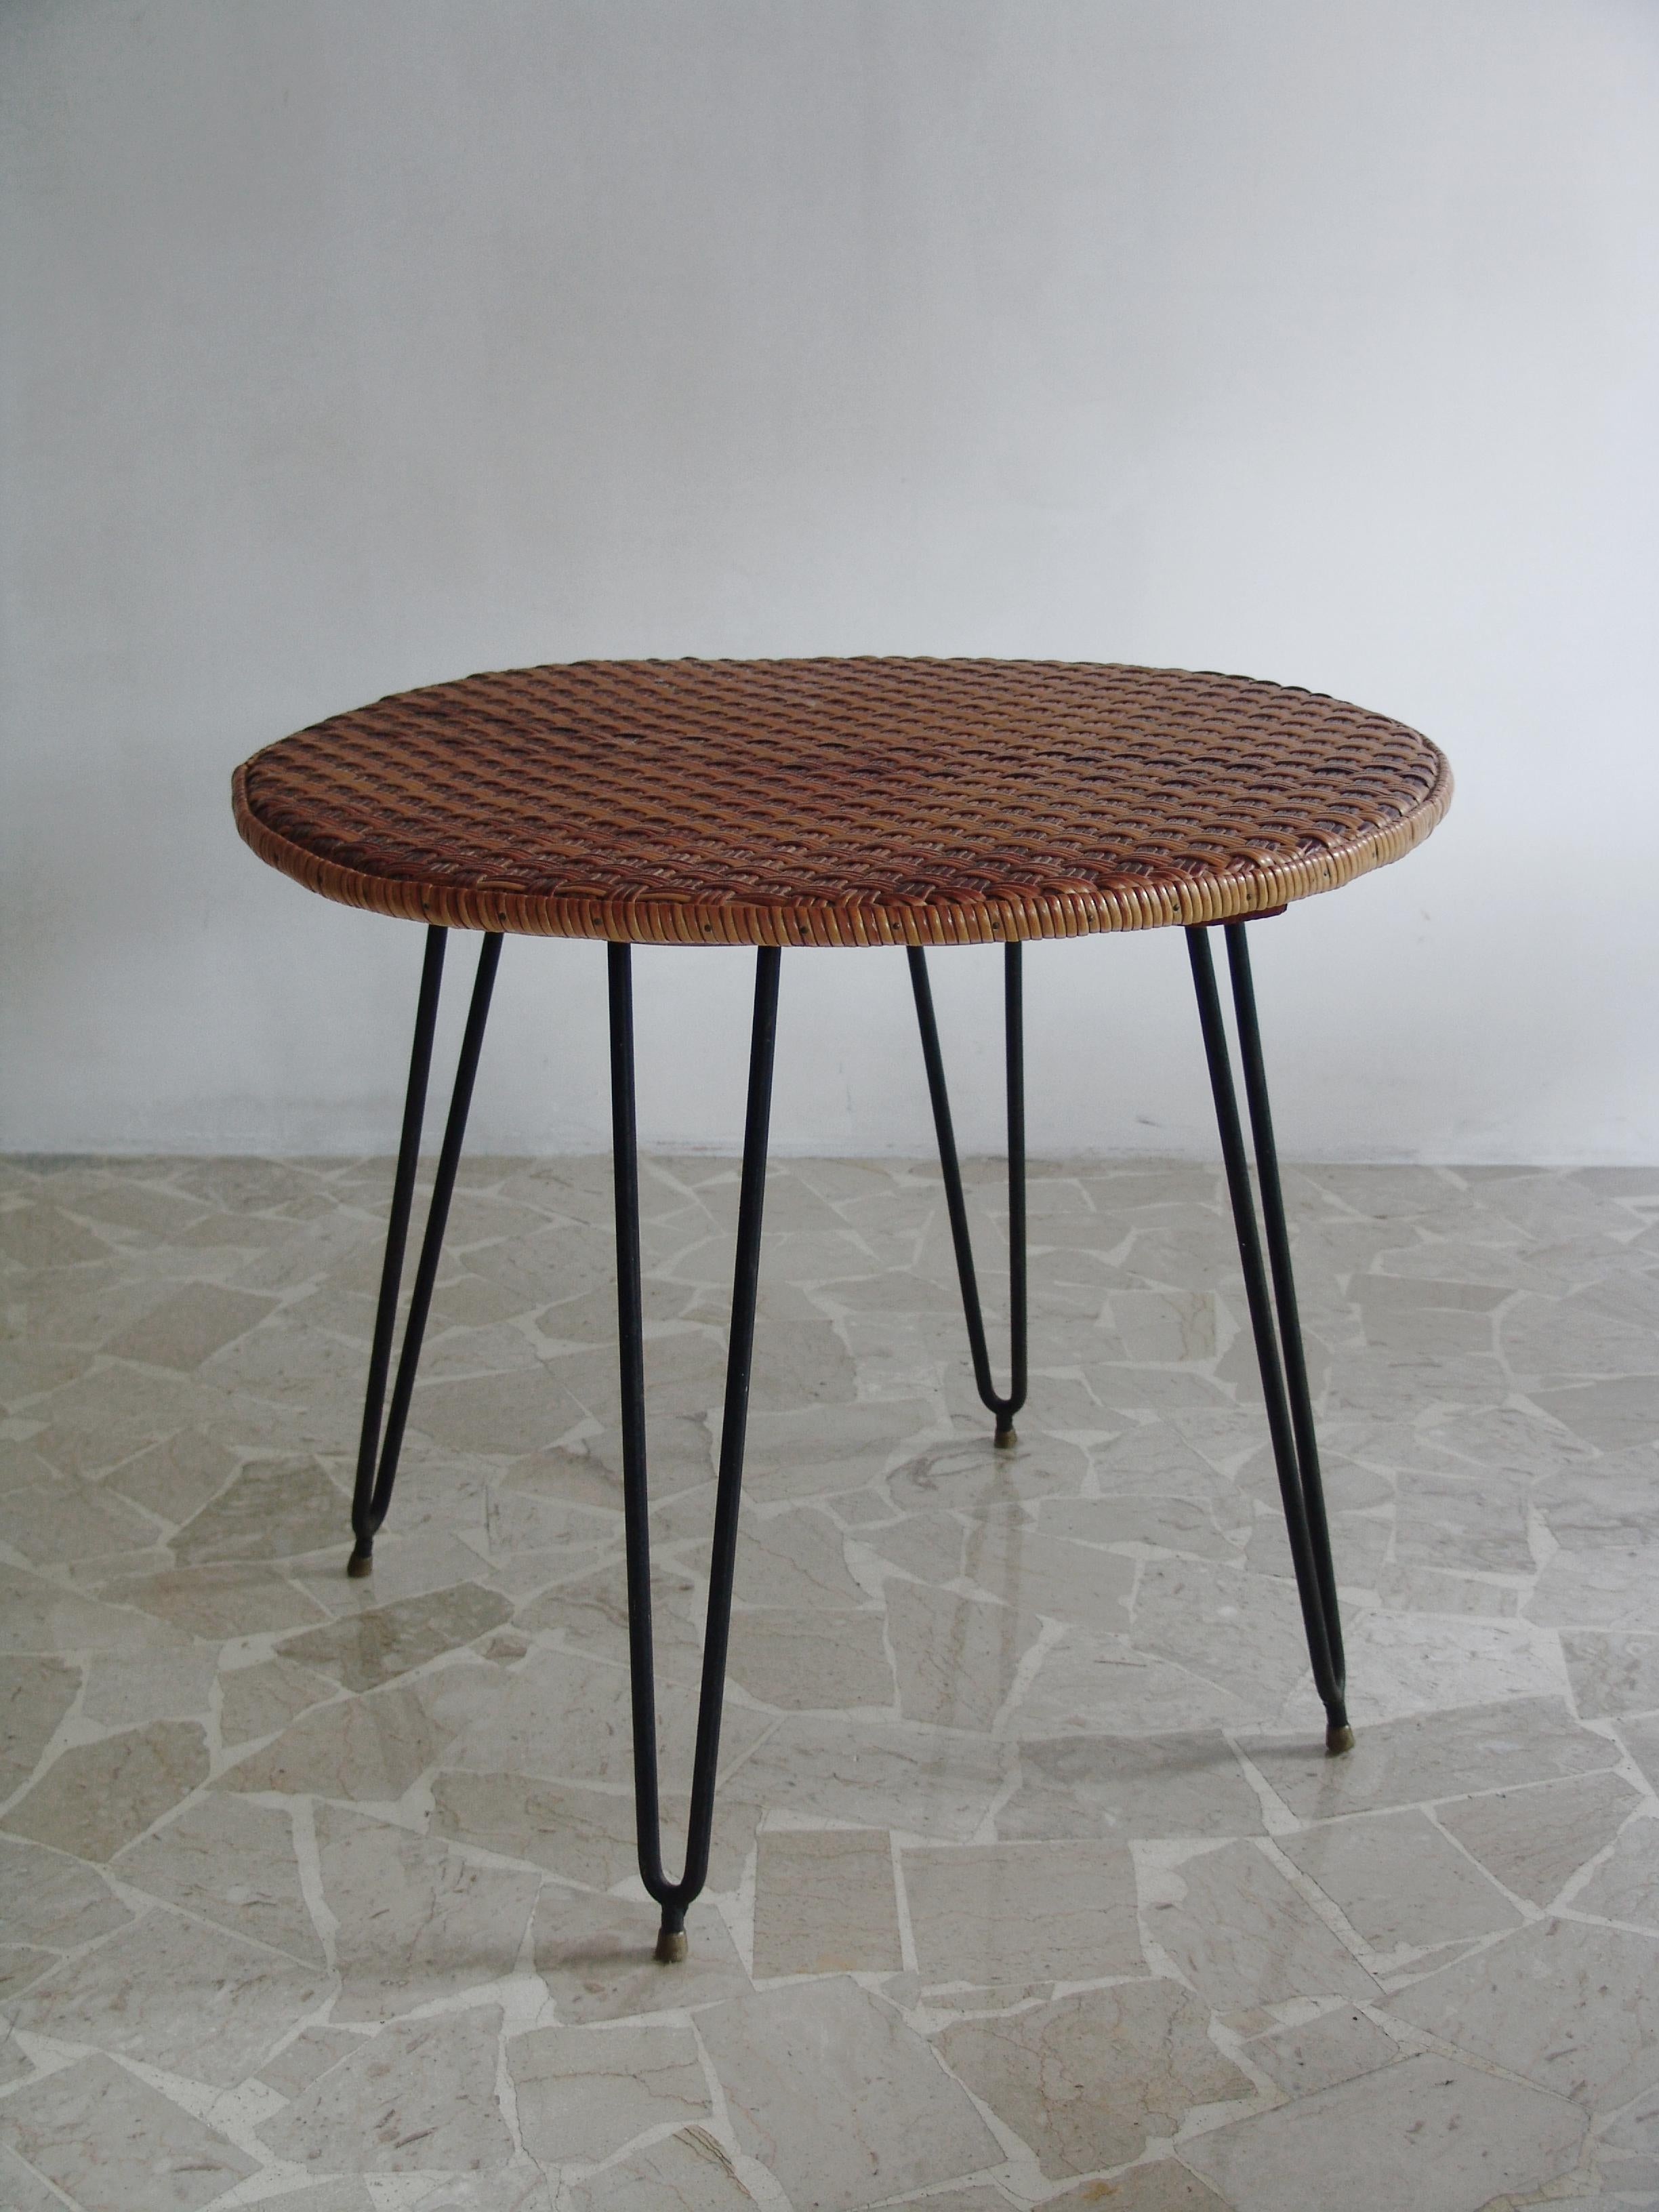 1950s, Italian Mid-Century modern wicker table, dining table and perfect for outdoor garden or patio.